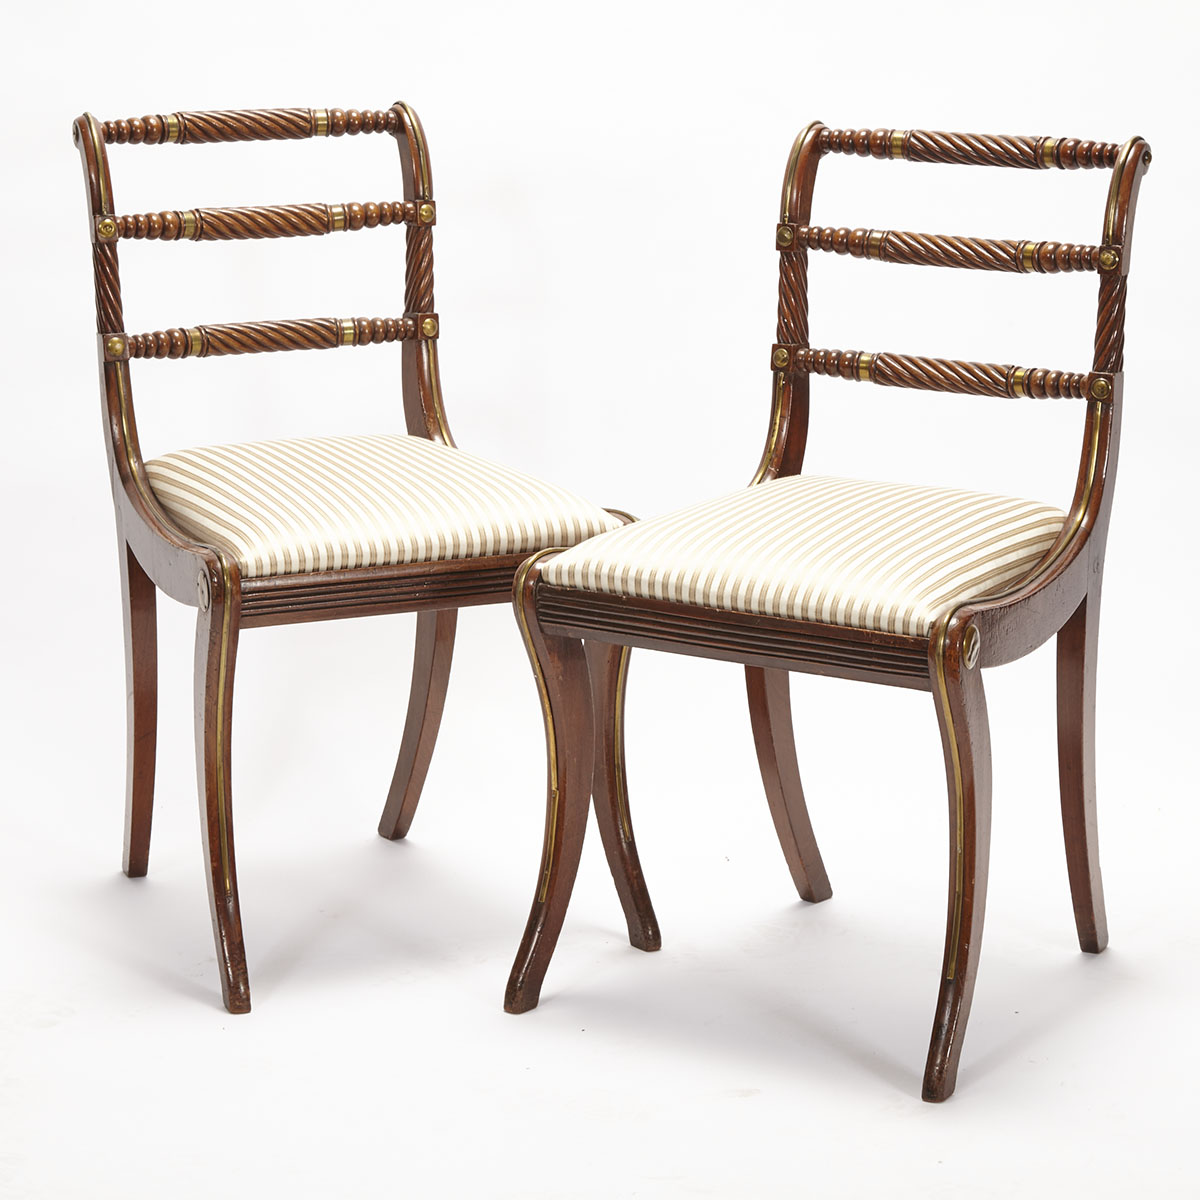 Pair Regency Brass Mounted Mahogany Side Chairs, c.1820